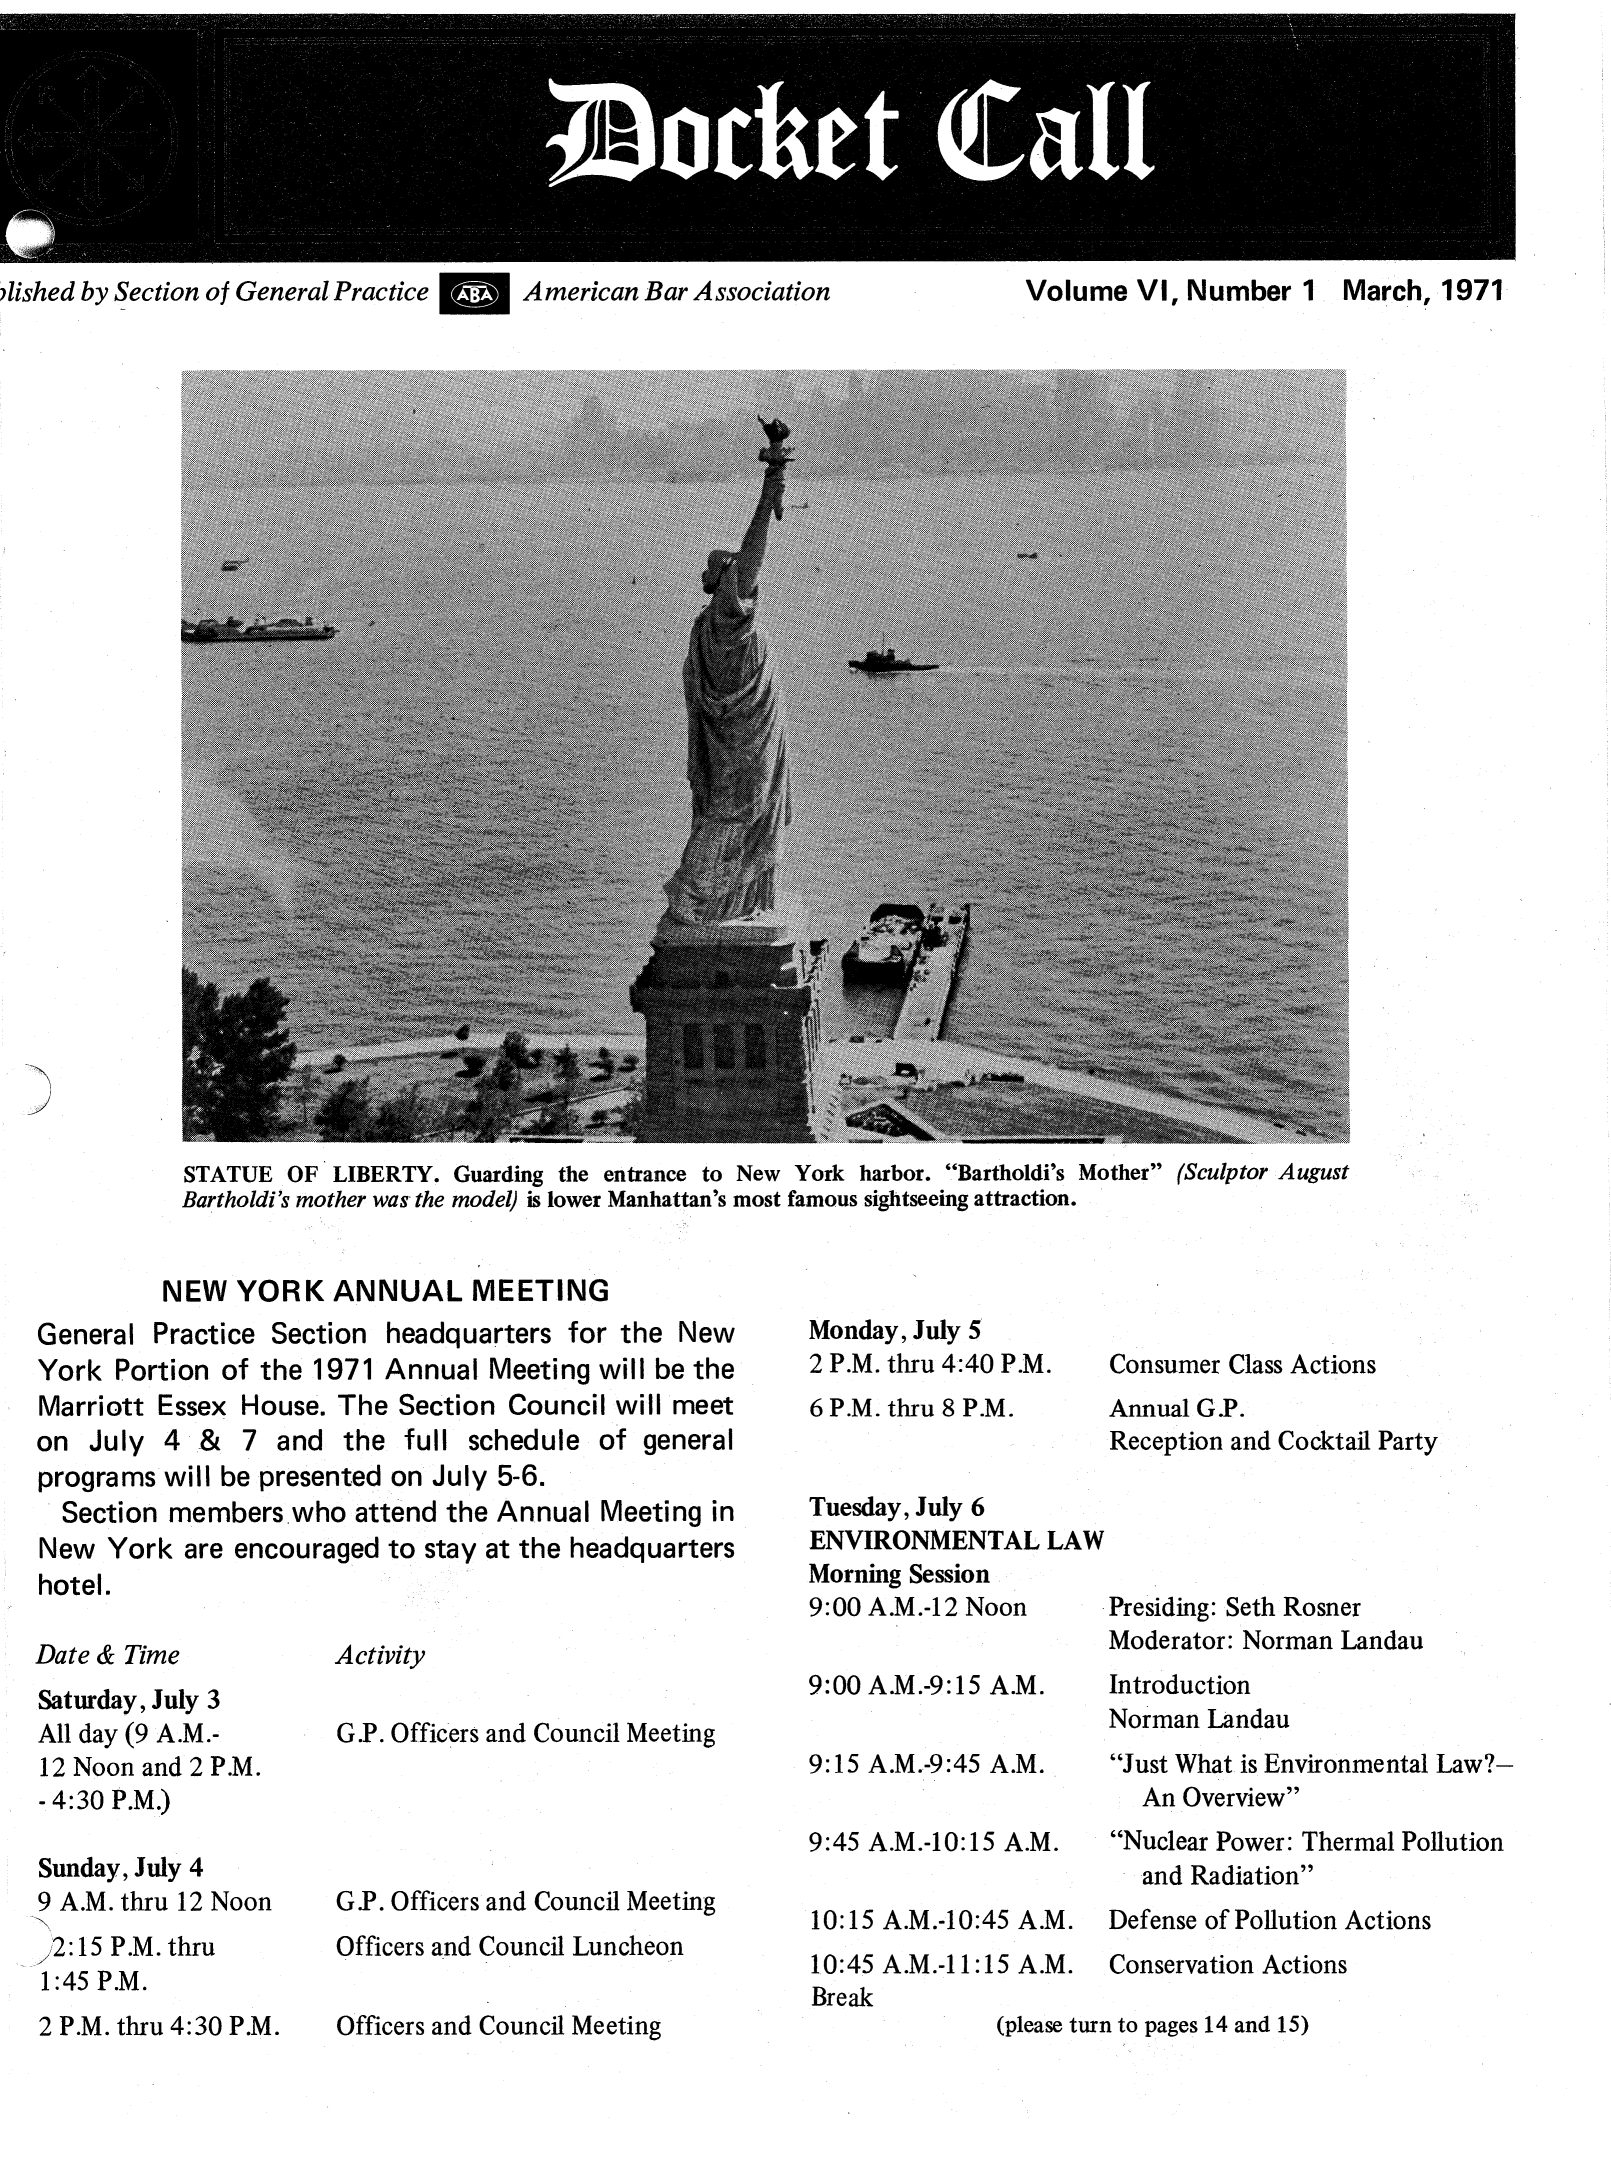 handle is hein.journals/dcktcll6 and id is 1 raw text is: j~I           4 ~

7lished by Section of General Practice  American Bar Association

Volume VI, Number 1 March, 1971

STATUE OF LIBERTY. Guarding the entrance to New York harbor. Bartholdi's Mother (Sculptor August
Bartholdi's mother was the model) is lower Manhattan's most famous sightseeing attraction.

NEW YORK ANNUAL MEETING
General Practice Section headquarters for the New
York Portion of the 1971 Annual Meeting will be the
Marriott Essex House. The Section Council will meet
on July 4 & 7 and the full schedule of general
programs will be presented on July 5-6.
Section members who attend the Annual Meeting in
New York are encouraged to stay at the headquarters
hotel.

Date & Time
Saturday, July 3
All day (9 A.M.-
12 Noon and 2 P.M.
- 4:30 P.M.)
Sunday, July 4
9 A.M. thru 12 Noon
2:15 P.M. thru
1:45 P.M.
2 P.M. thru 4:30 P.M.

Activity

G.P. Officers and Council Meeting

G.P. Officers and Council Meeting
Officers and Council Luncheon
Officers and Council Meeting

Monday, July 5
2 P.M. thru 4:40 P.M.
6 P.M. thru 8 P.M.
Tuesday, July 6
ENVIRONMENTAL LAW
Morning Session
9:00 A.M.-12 Noon
9:00 A.M.-9:15 A.M.
9:15 A.M.-9:45 A.M.
9:45 A.M.-10:15 A.M.

Consumer Class Actions
Annual G.P.
Reception and Cocktail Party
Presiding: Seth Rosner
Moderator: Norman Landau
Introduction
Norman Landau
Just What is Environmental Law?-
An Overview
Nuclear Power: Thermal Pollution
and Radiation

10:15 A.M.-10:45 A.M. Defense of Pollution Actions
10:45 A.M.-11:15 A.M. Conservation Actions
Break
(please turn to pages 14 and 15)


